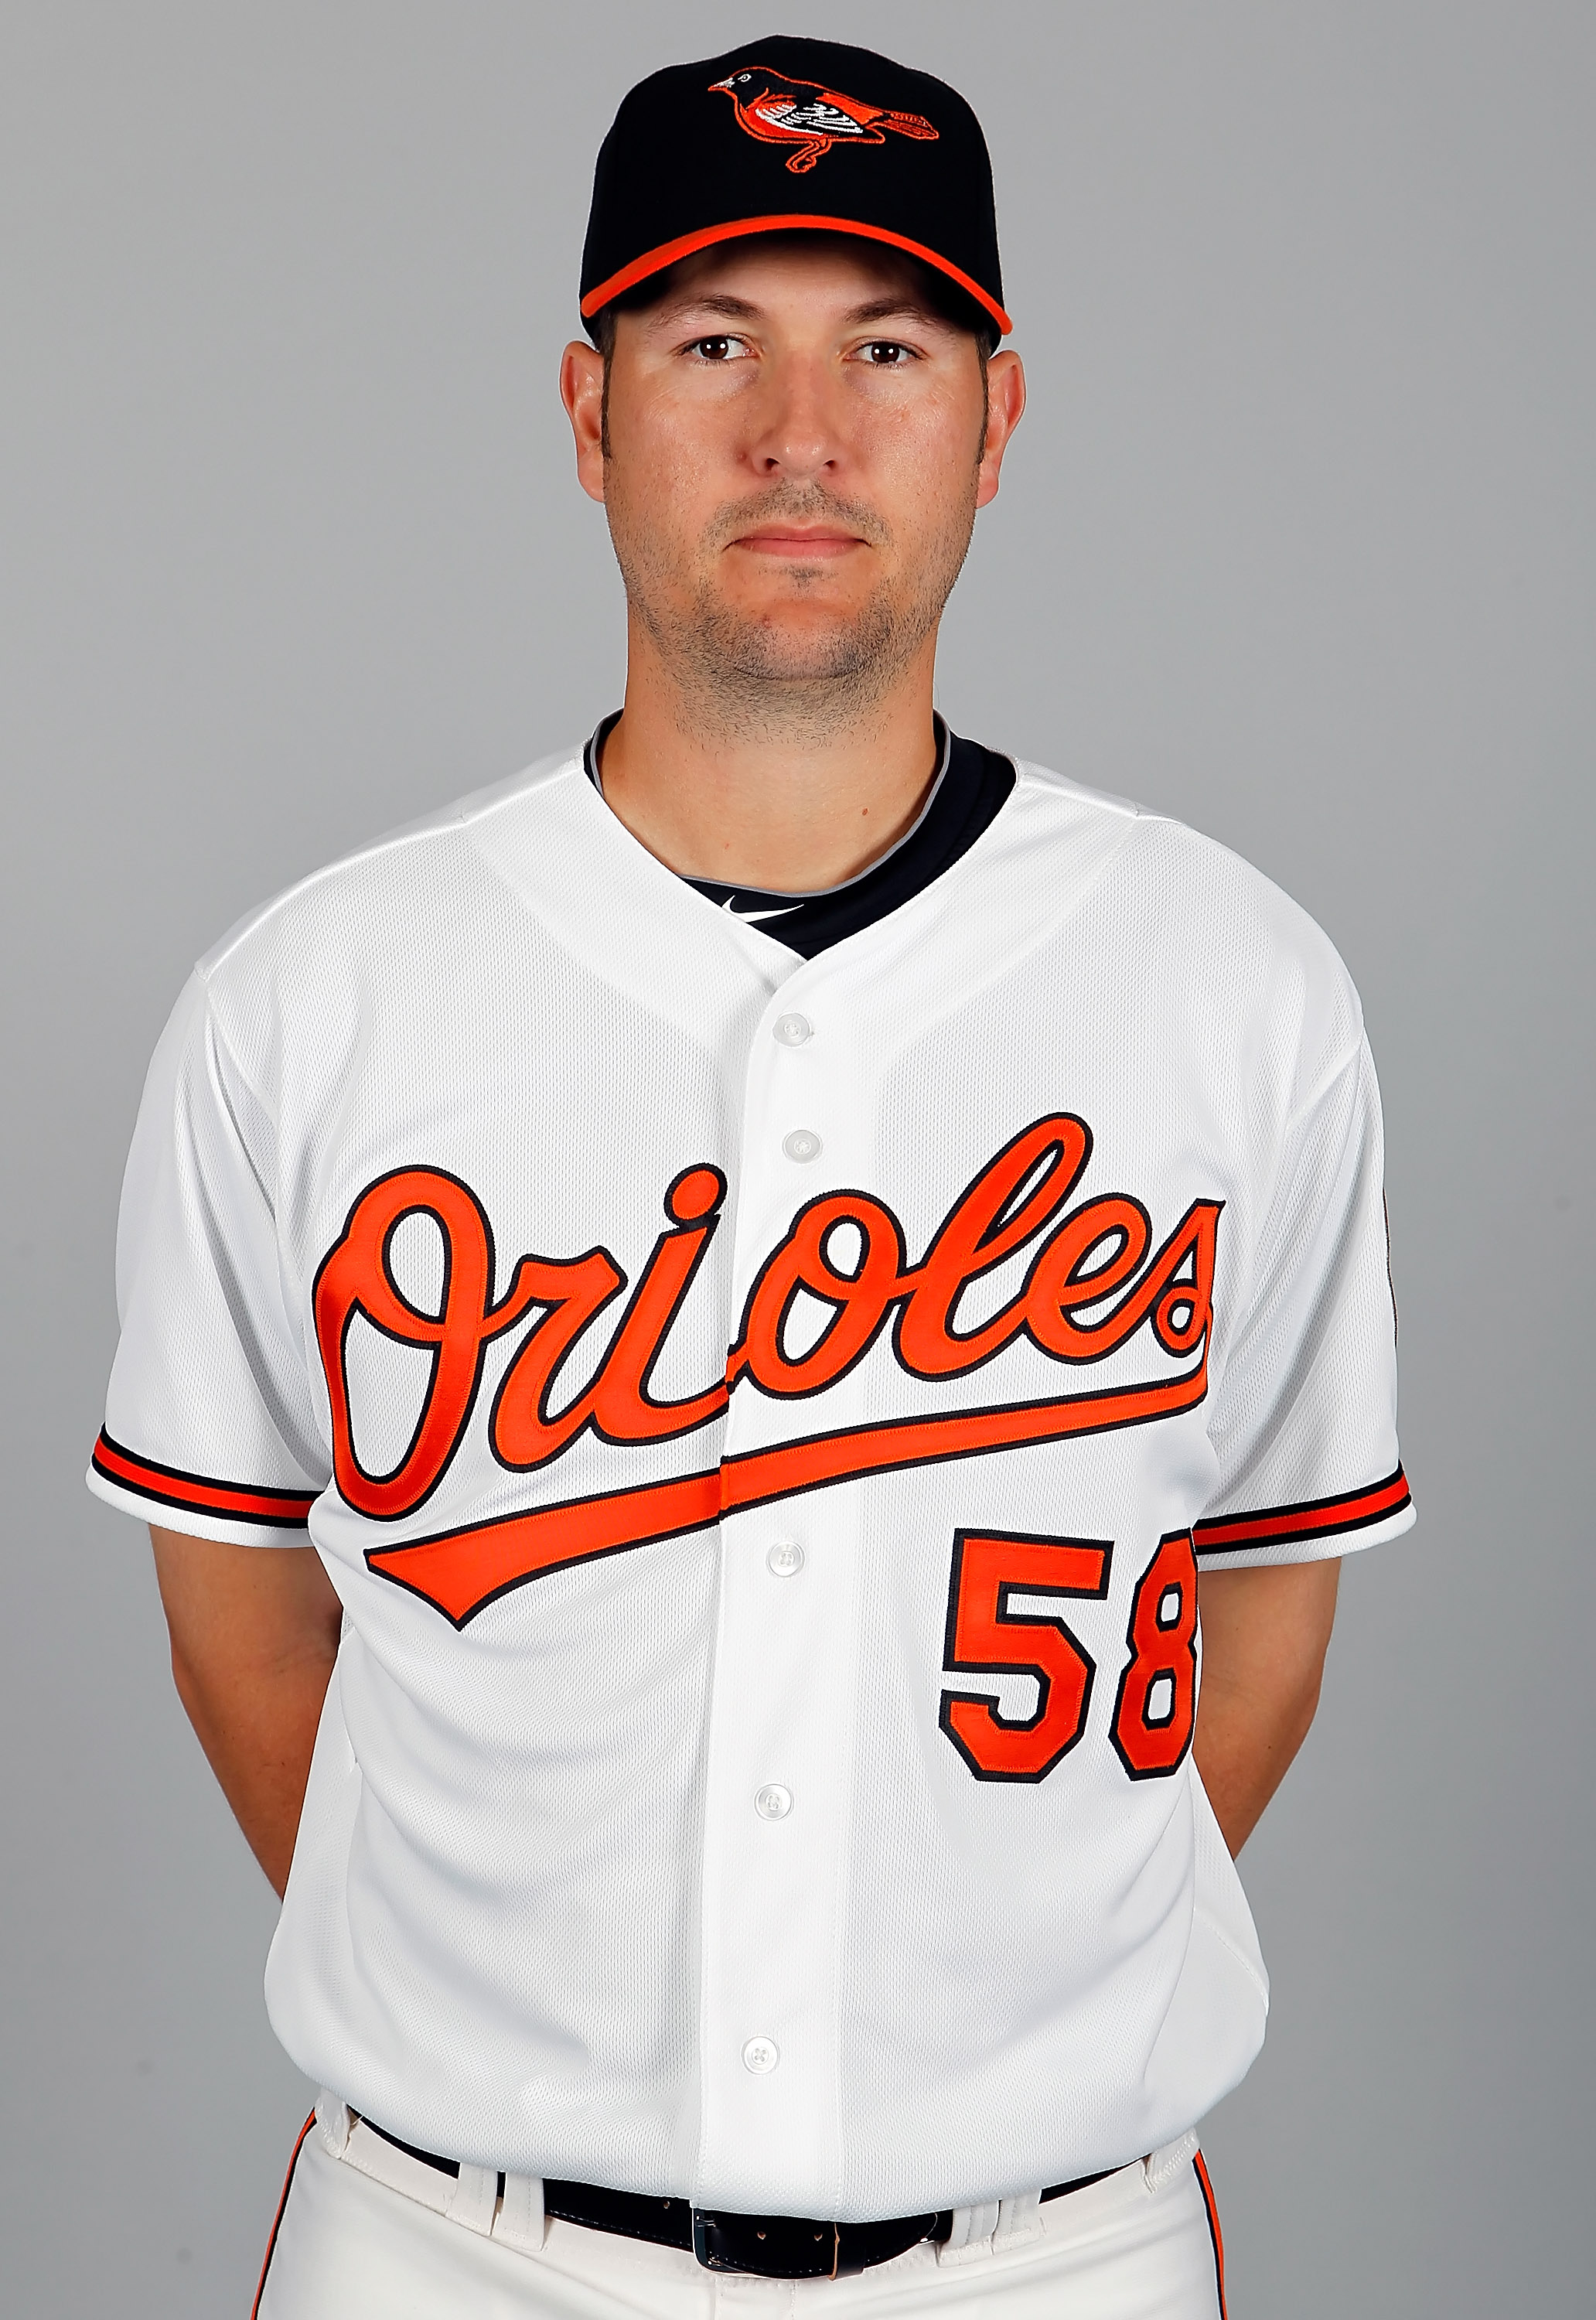 SARASOTA, FL - FEBRUARY 26:  Pitcher Justin Duchscherer #58 of the Baltimore Orioles poses for a photo during photo day at Ed Smith Stadium on February 26, 2011 in Sarasota, Florida.  (Photo by J. Meric/Getty Images)